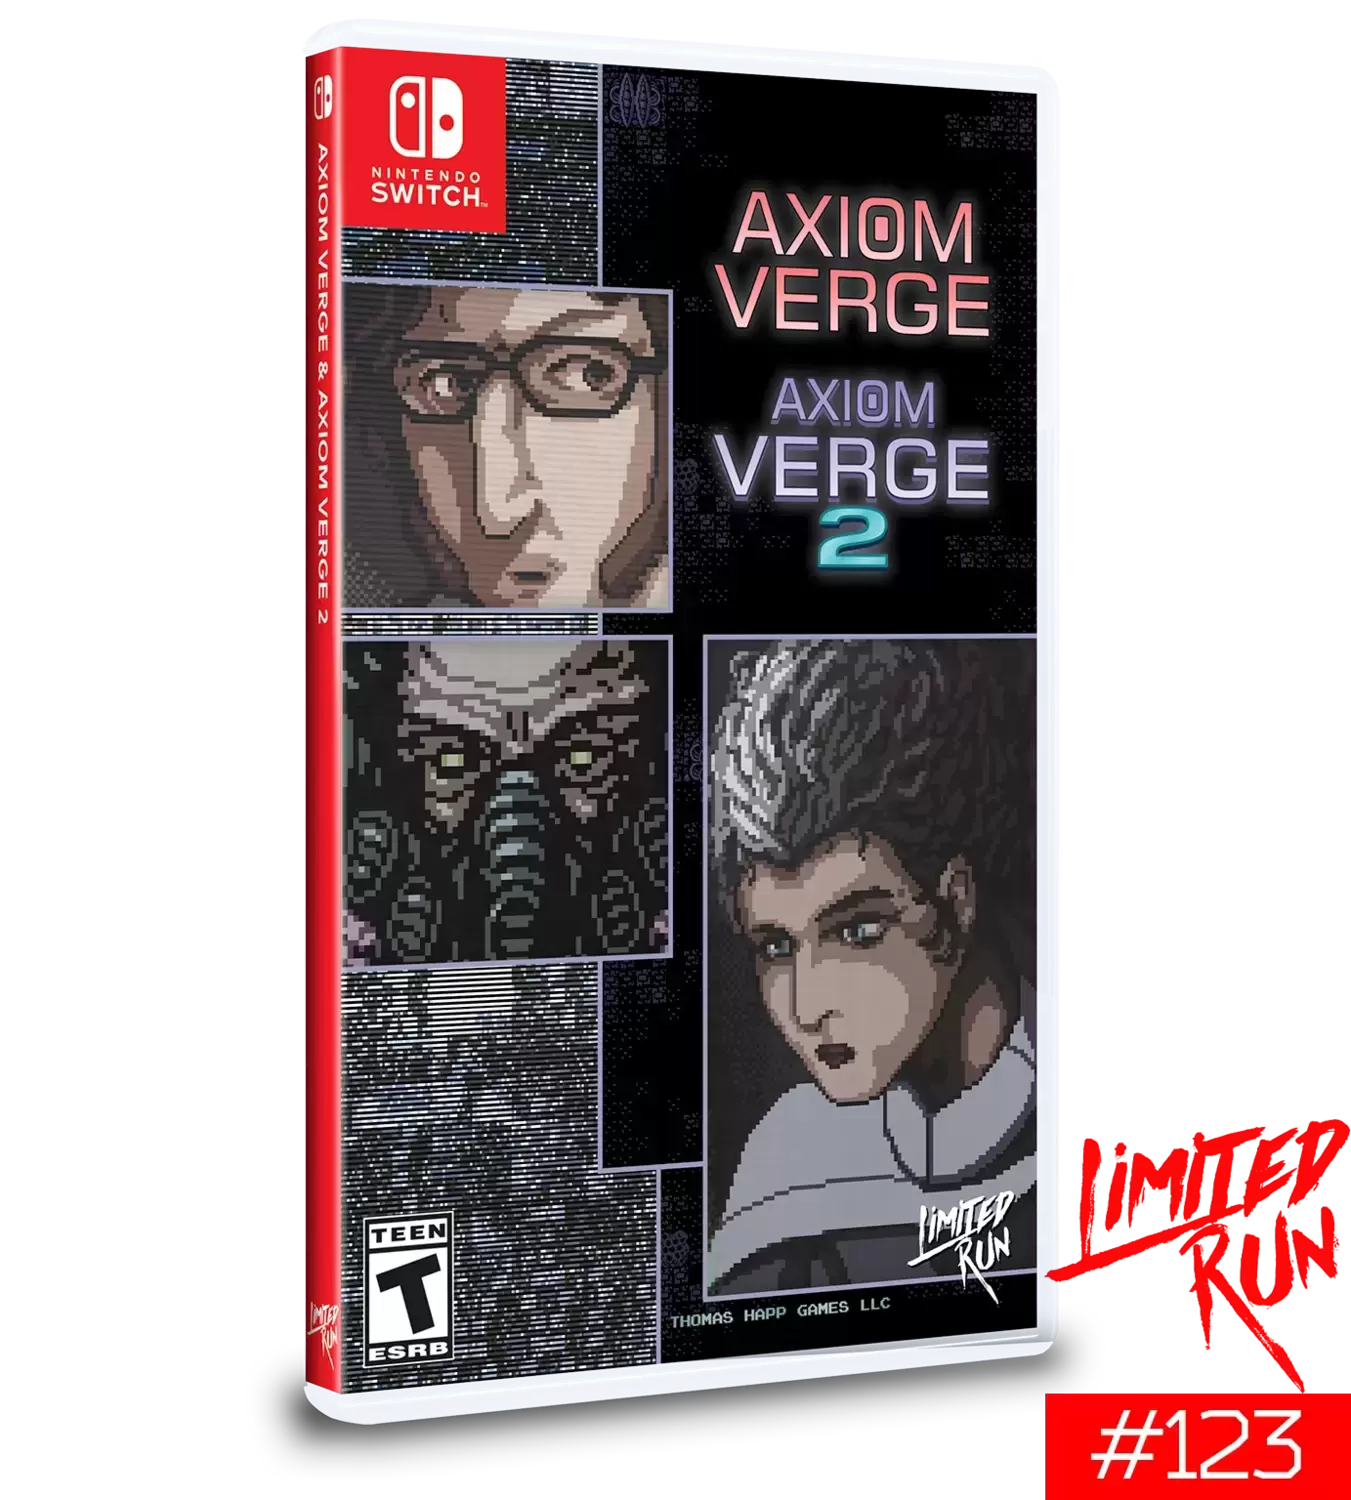 Nintendo Switch Games - Axiom Verge 1 & 2 Double Pack - Limited Run Games